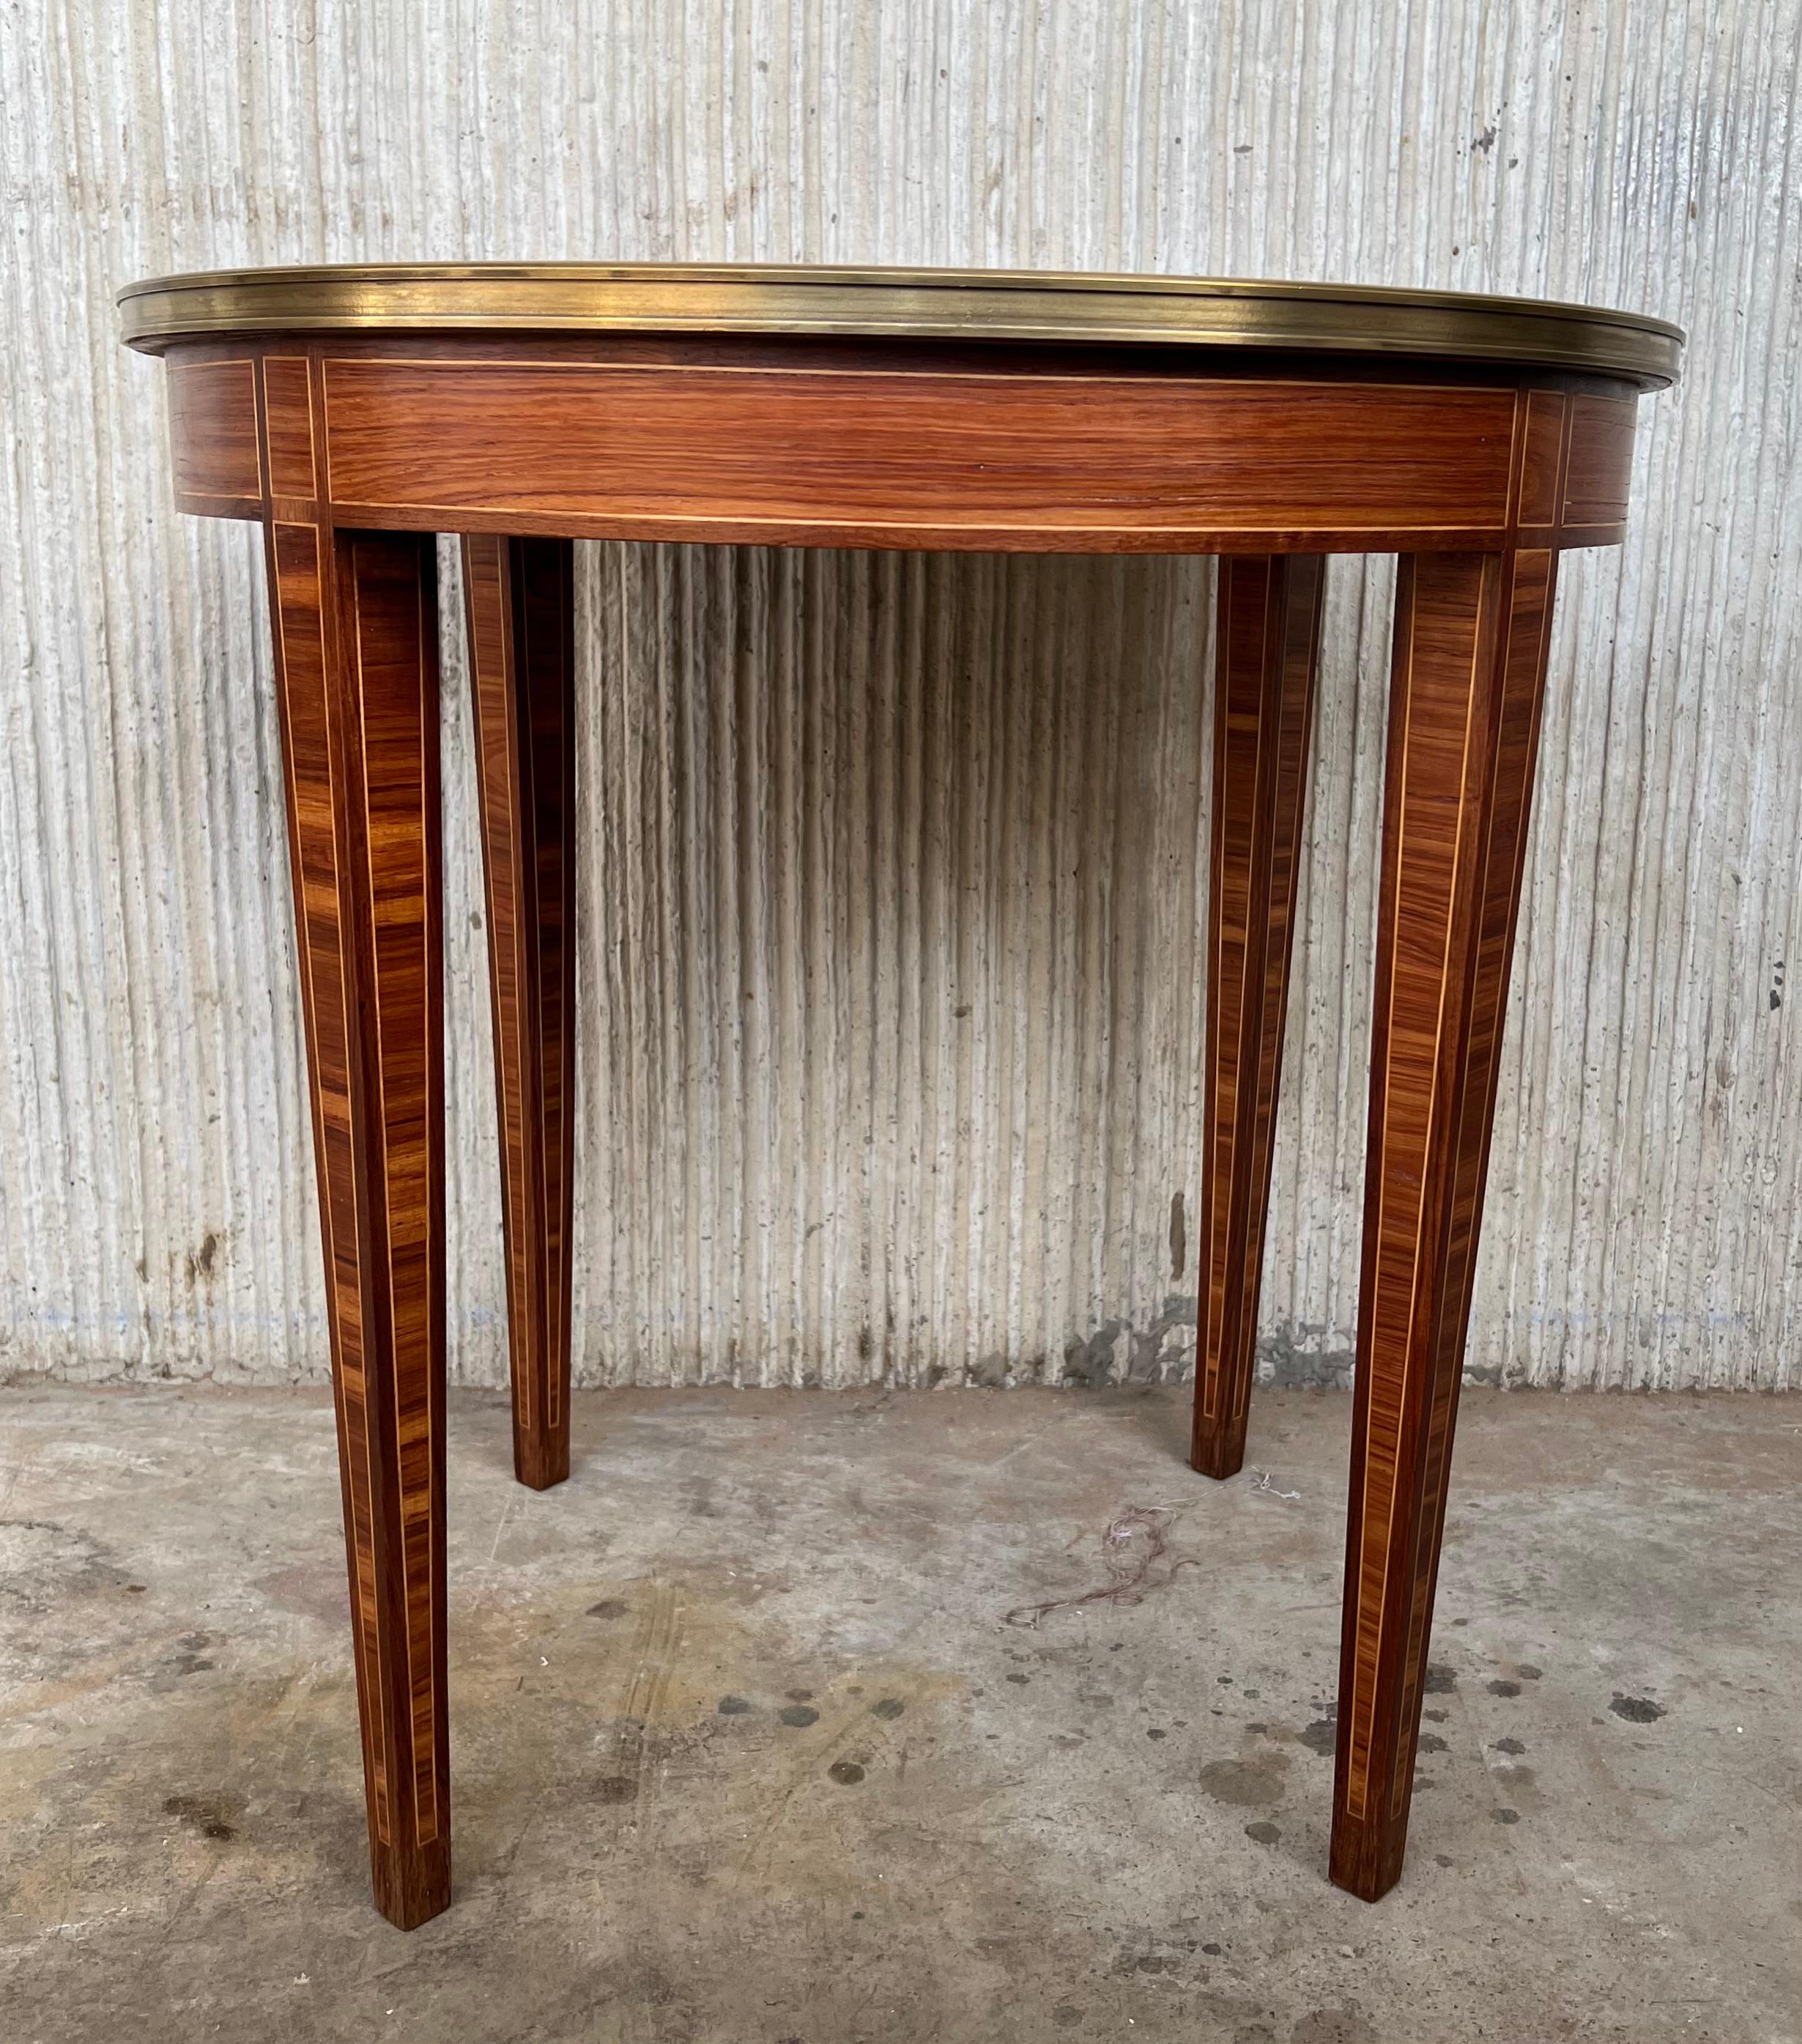 An incredibly fine table of the Belle Époque period, this stunning circular gueridon is designed in the distinct and angular Louis XVI style with tight lines and tapered legs. The surface of the top and around the apron is a complex pattern of